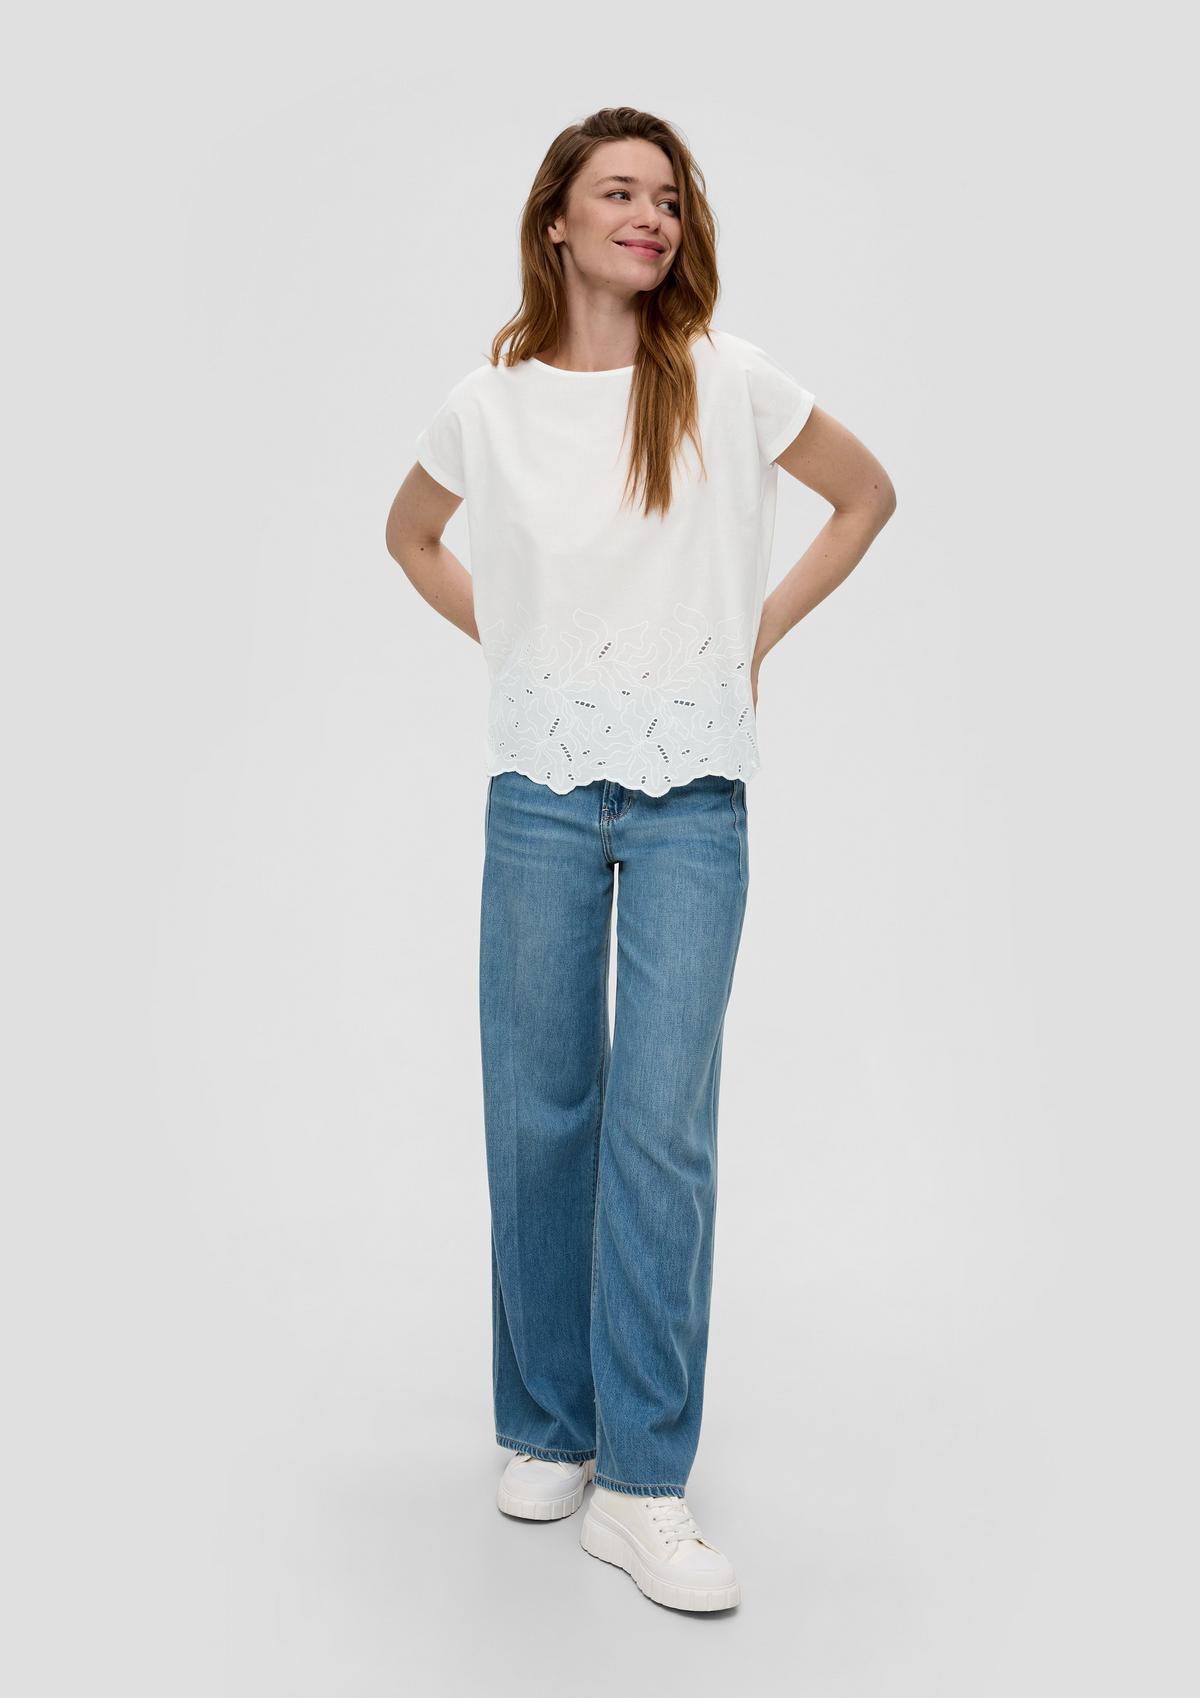 s.Oliver Embroidered top